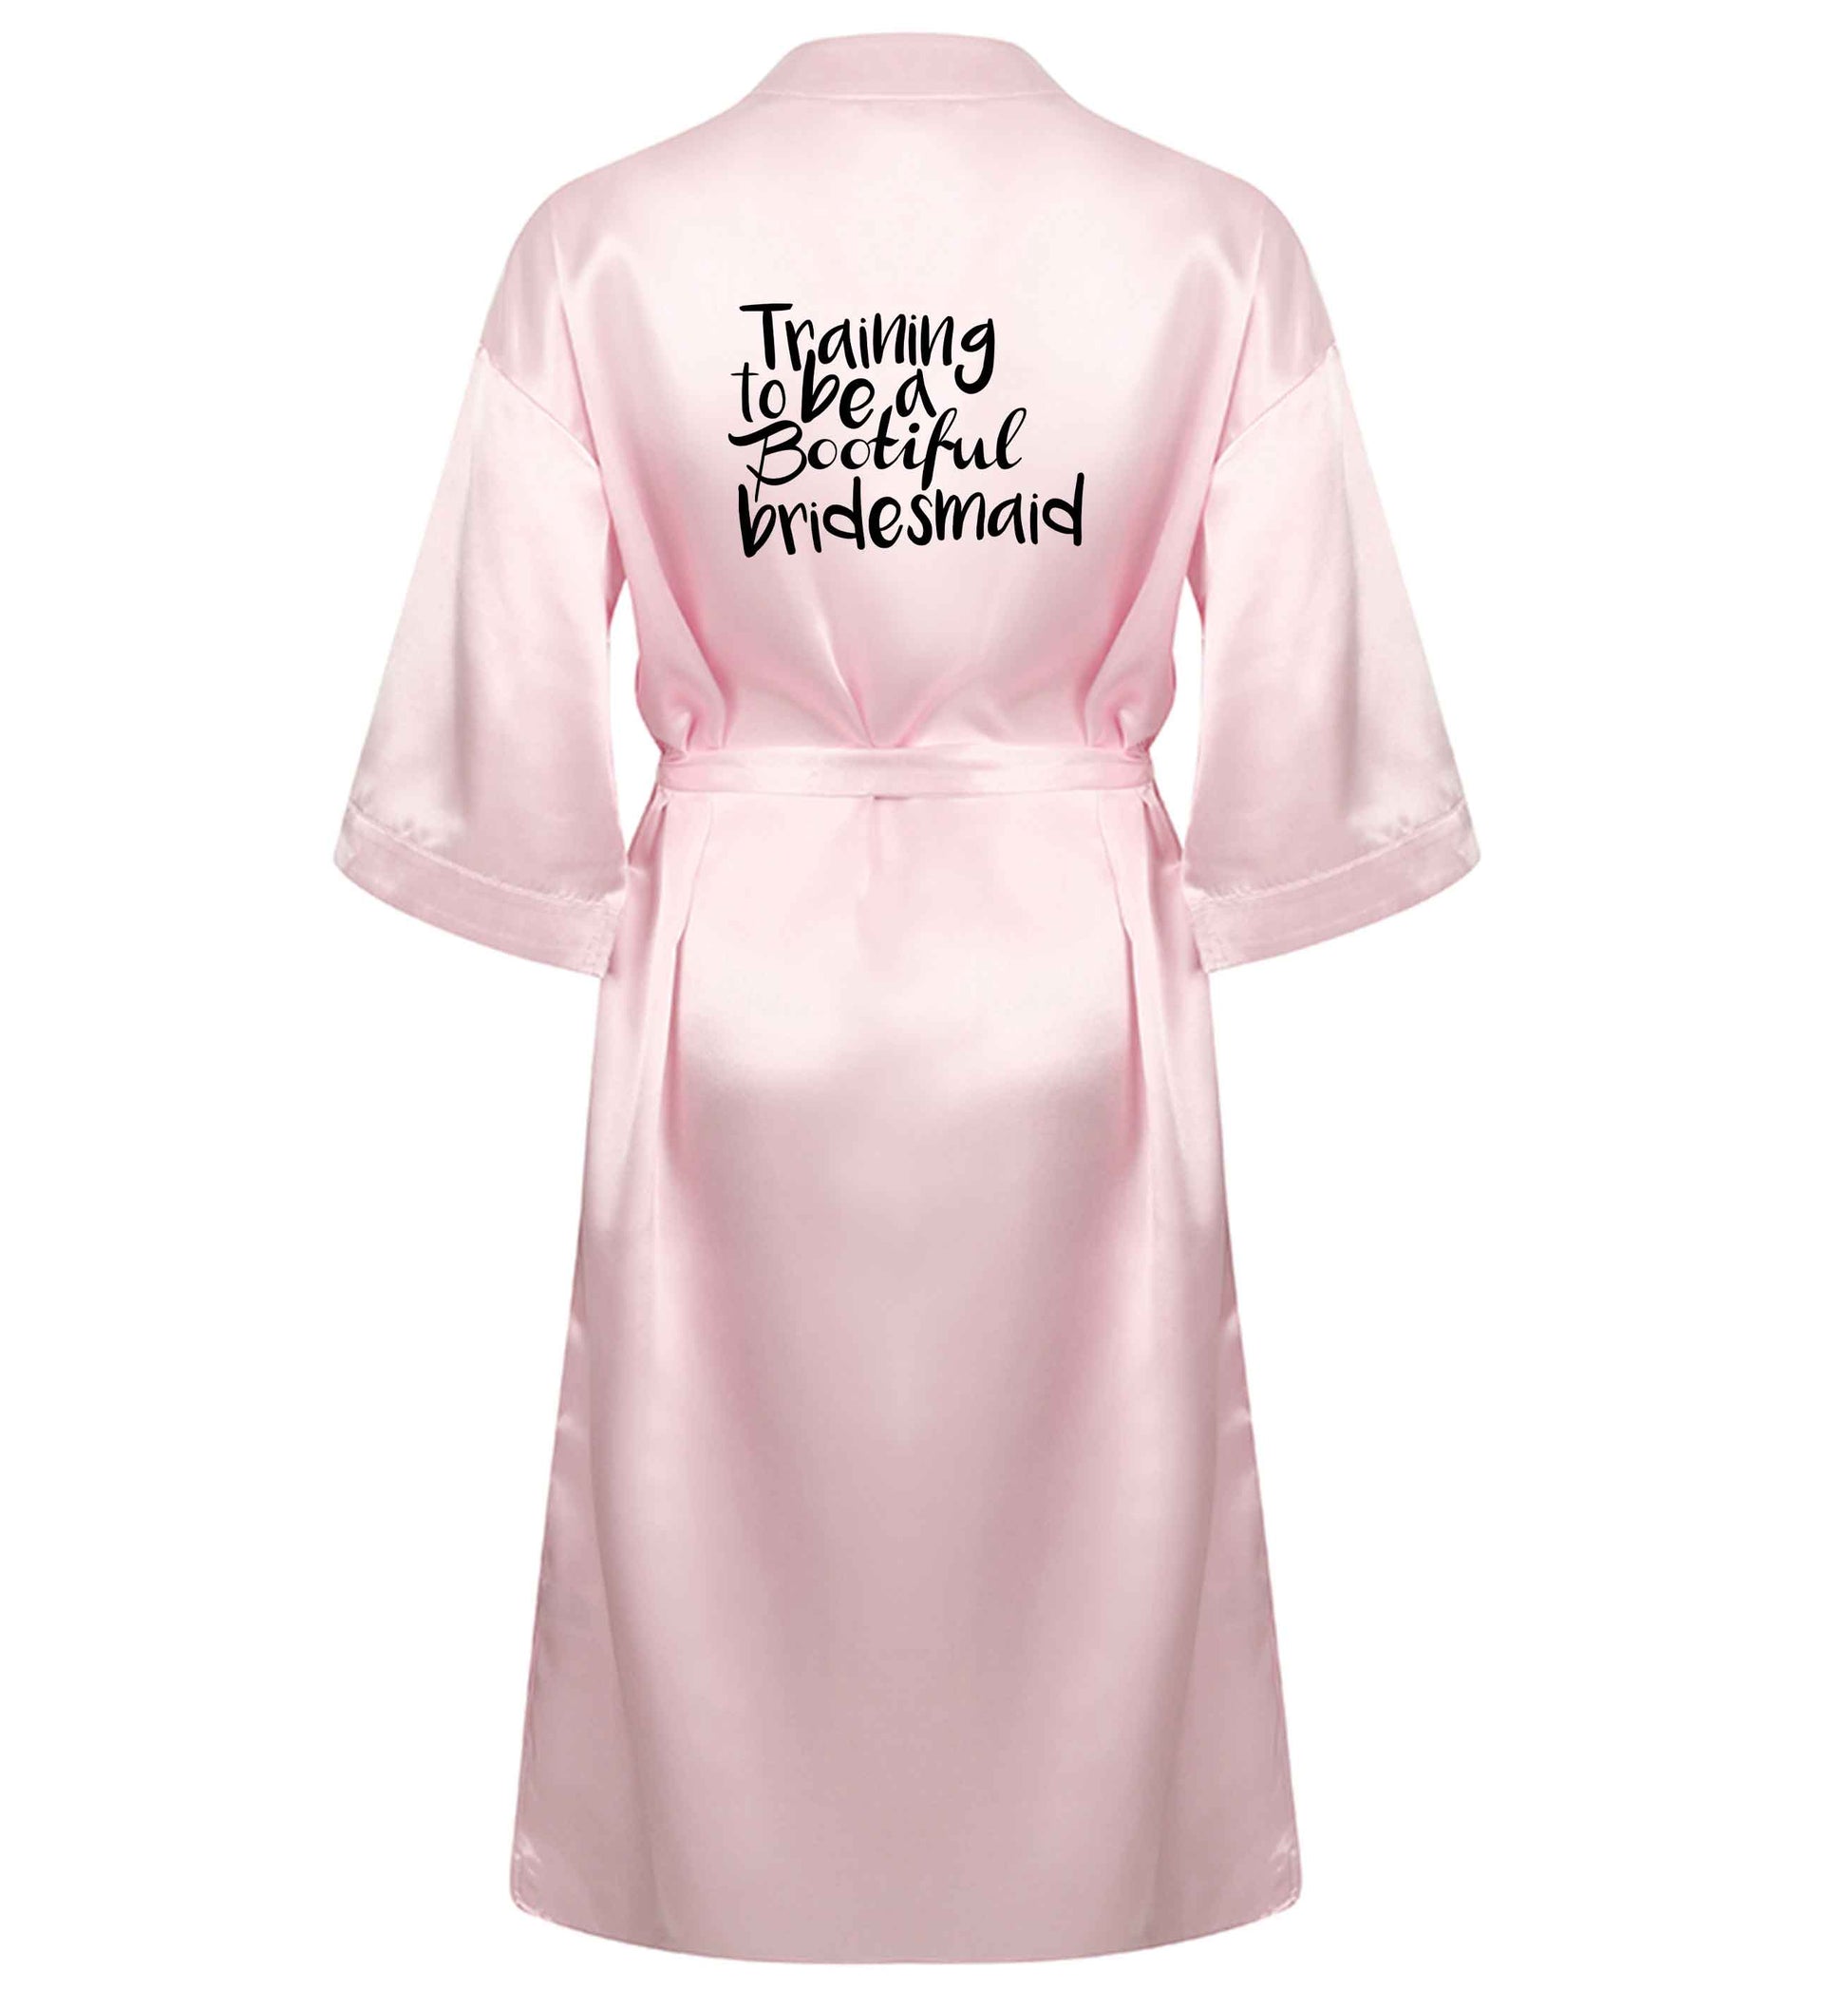 Get motivated and get fit for your big day! Our workout quotes and designs will get you ready to sweat! Perfect for any bride, groom or bridesmaid to be!  XL/XXL pink  ladies dressing gown size 16/18